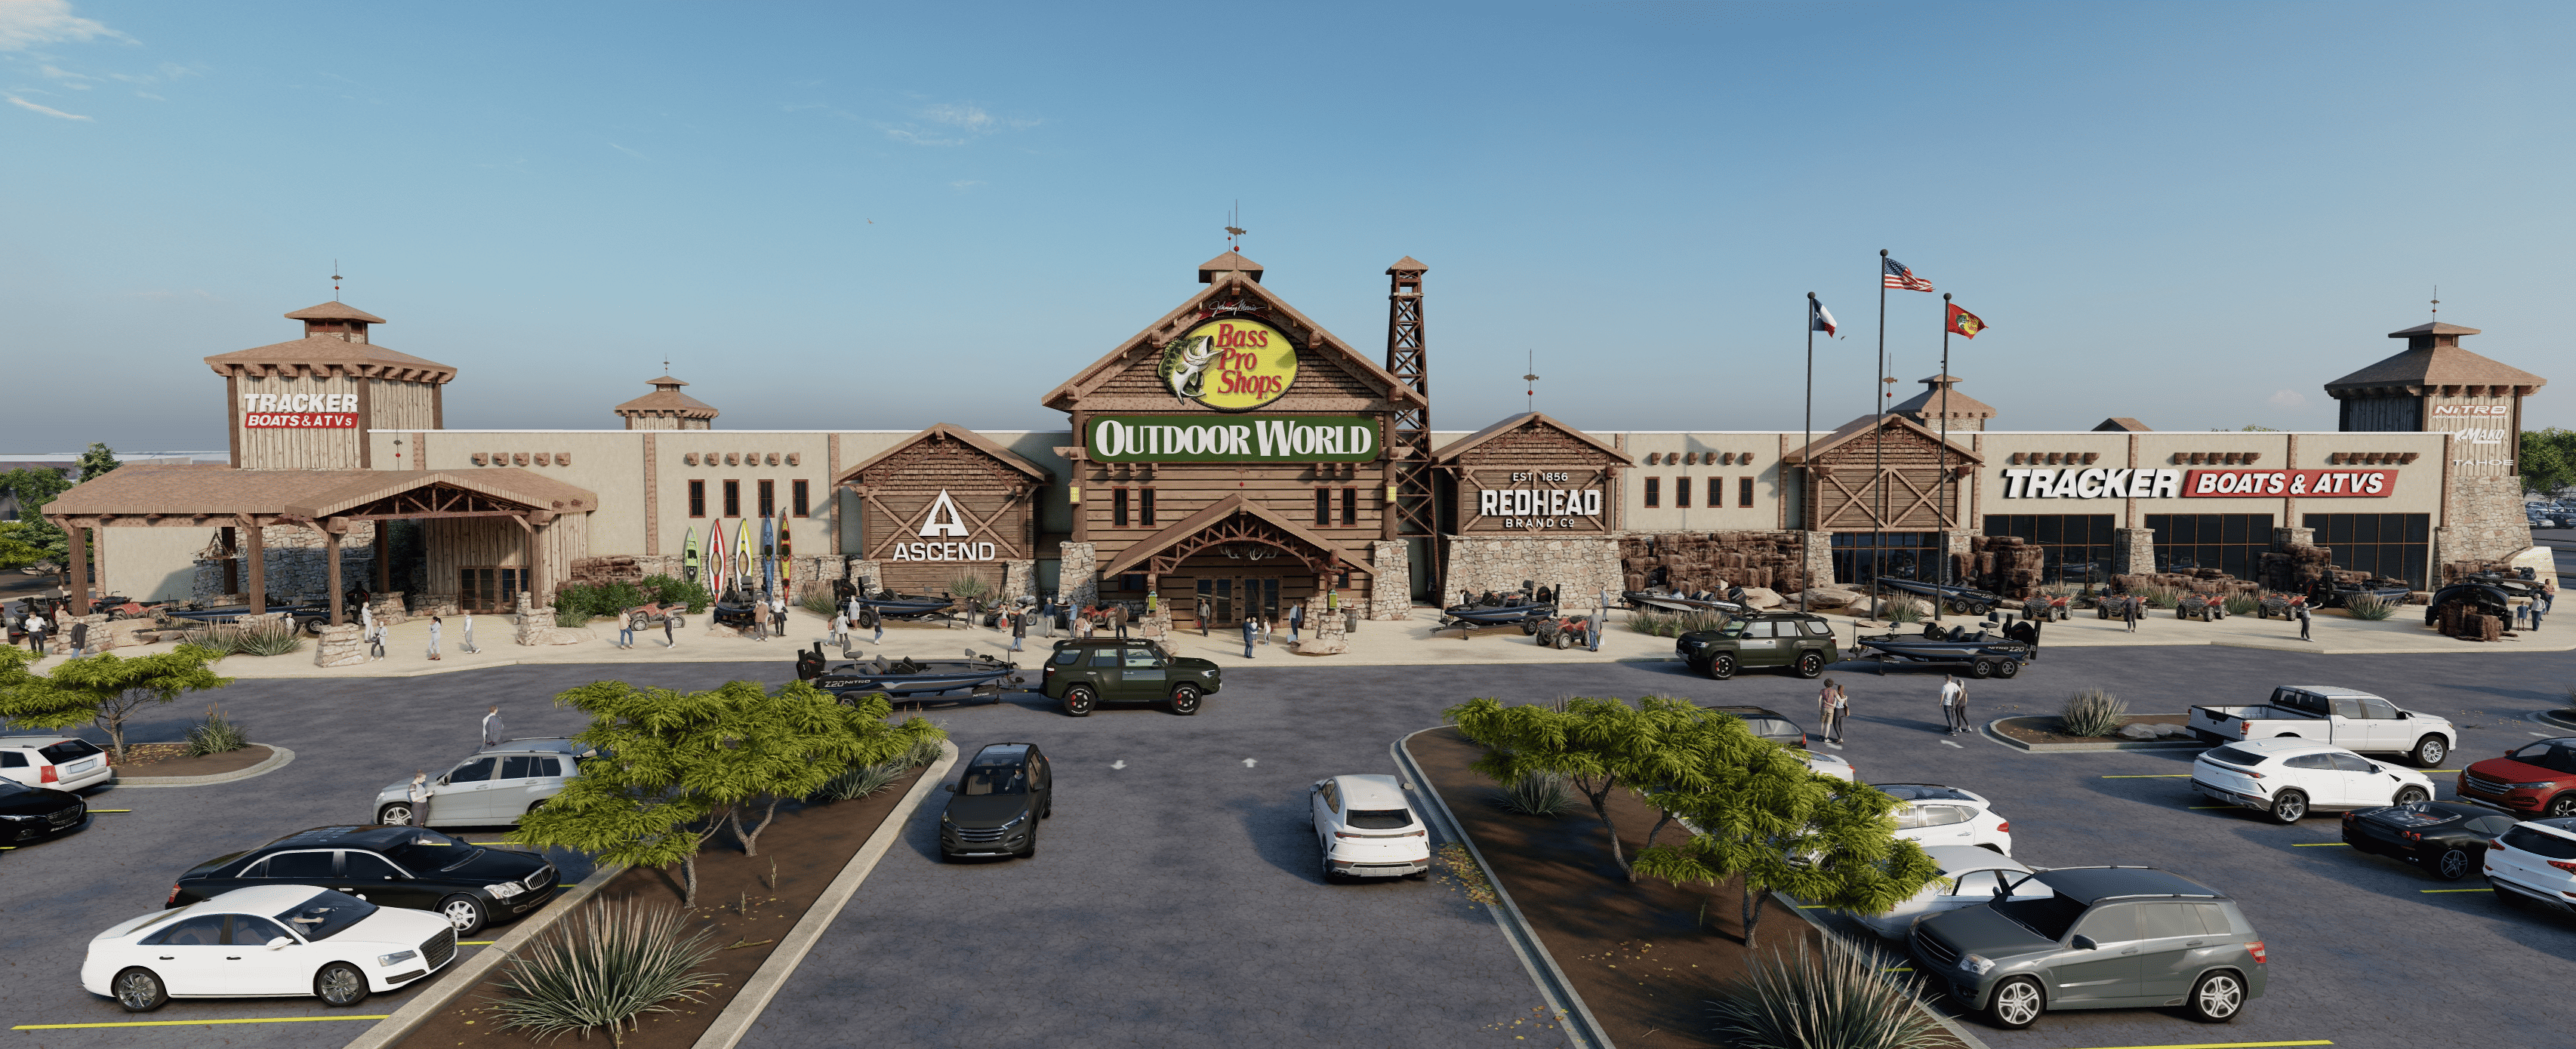 Bass Pro Shops, North America's premier outdoor and conservation company,  updates plans for new destination store in Texas to serve Odessa and  Midland metro markets - Bass Pro